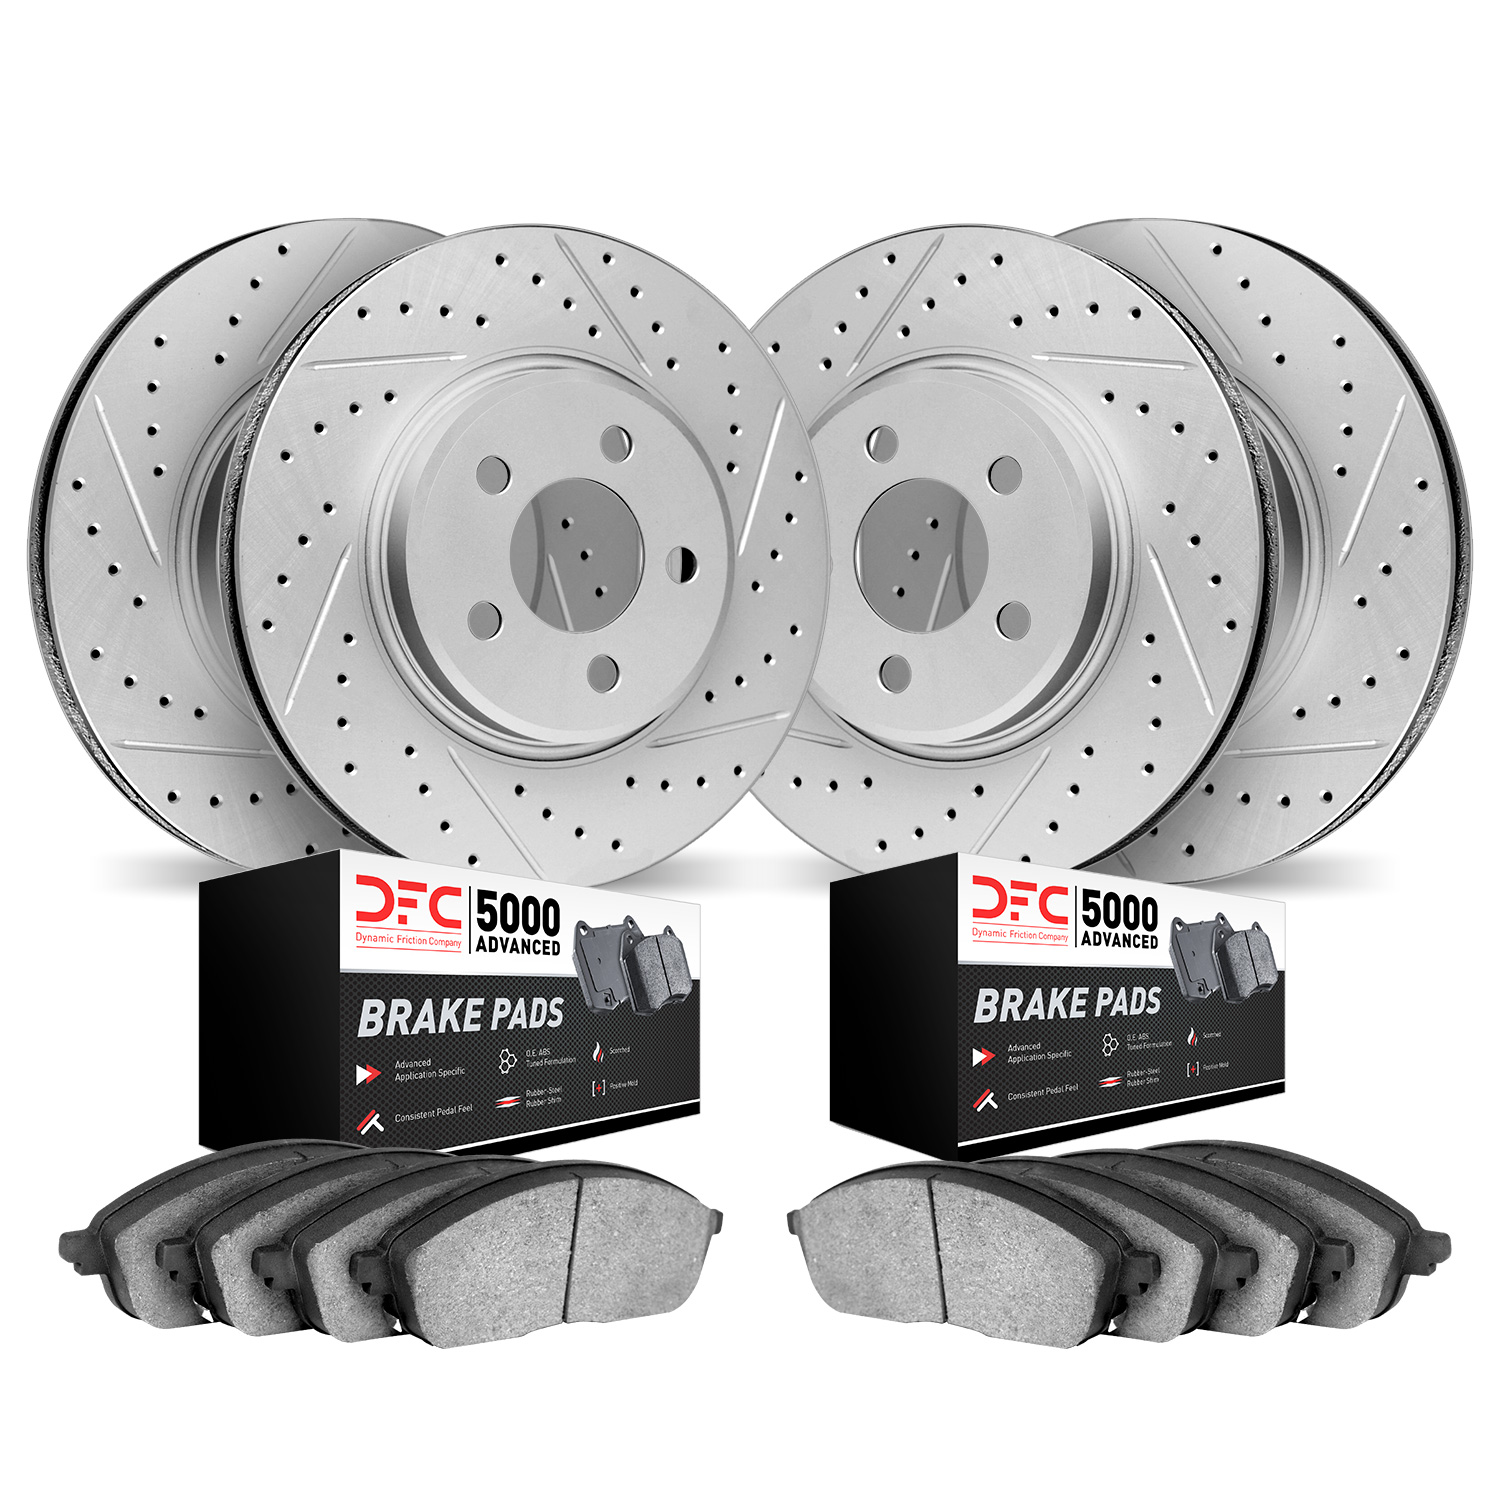 2504-80033 Geoperformance Drilled/Slotted Rotors w/5000 Advanced Brake Pads Kit, 2007-2015 Ford/Lincoln/Mercury/Mazda, Position: